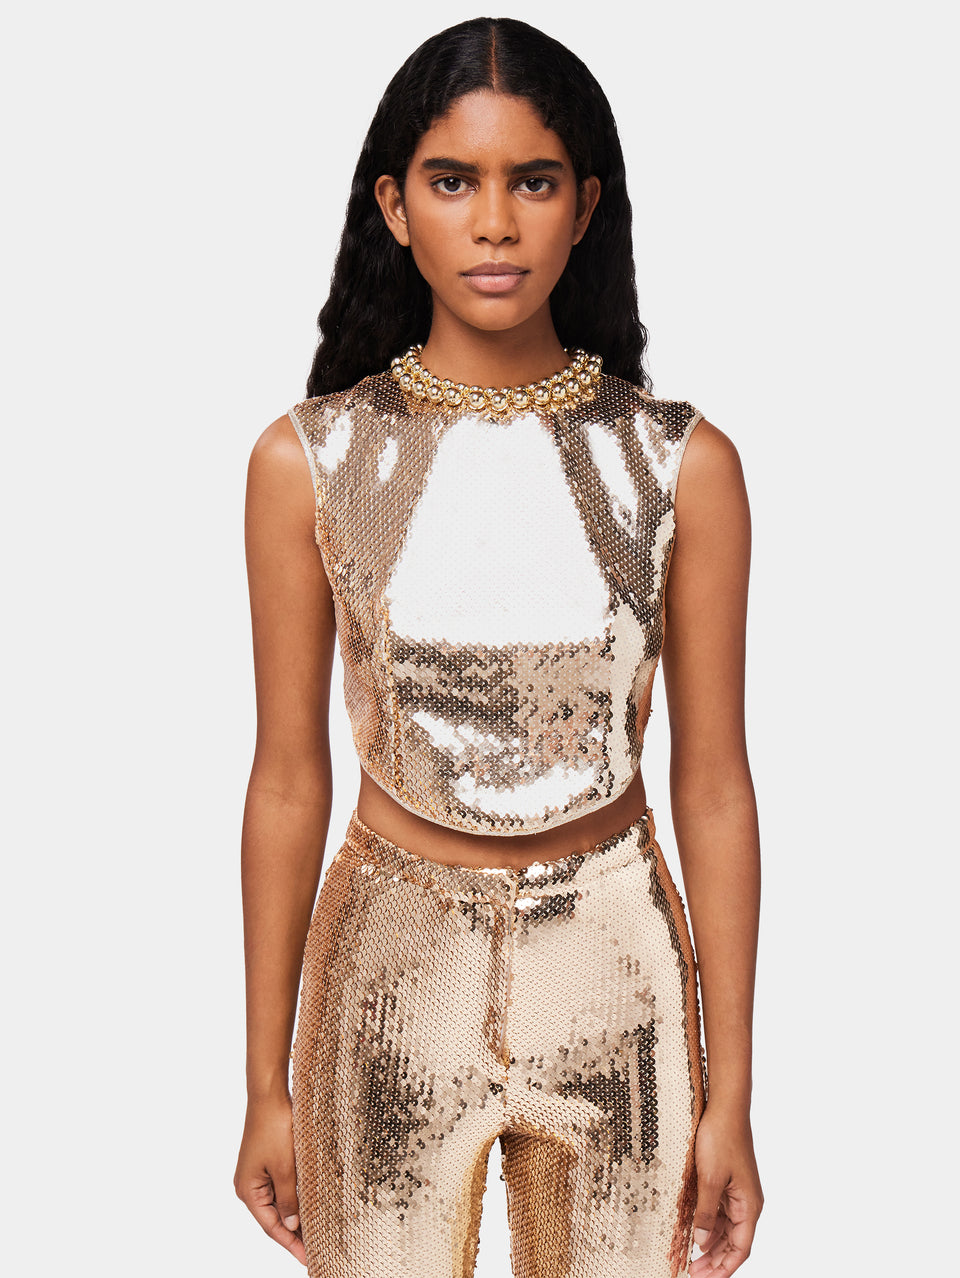 Sparkly Gold Sequin Crop Top - Size XS – M